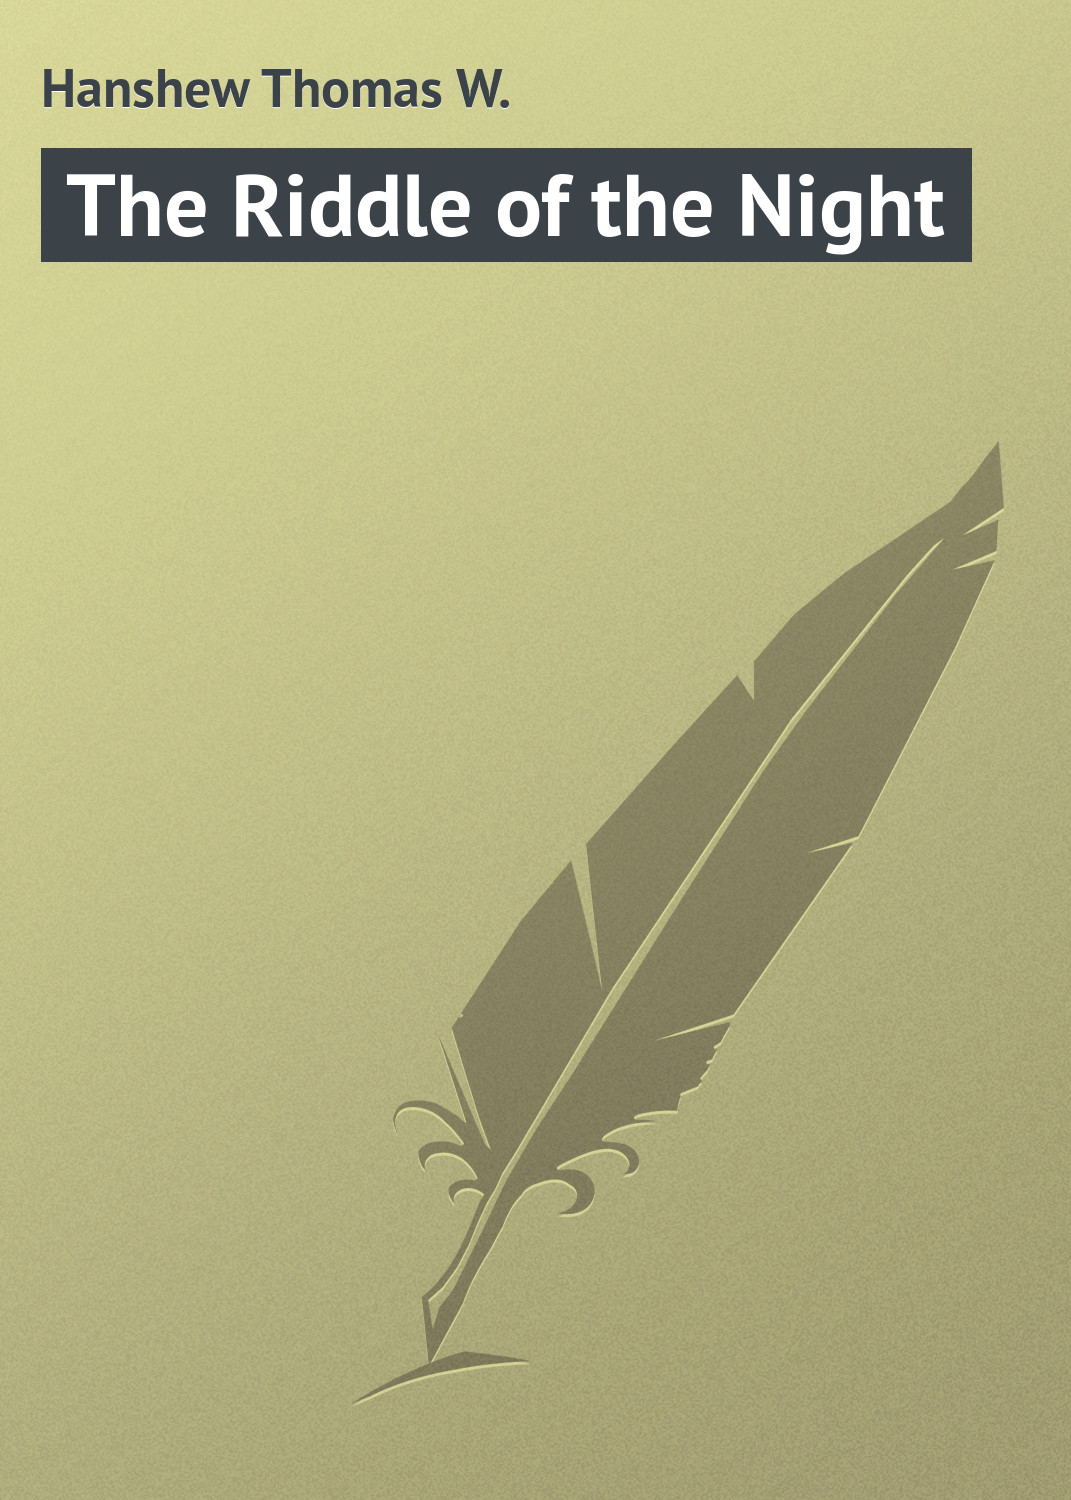 Hanshew Thomas W. The Riddle of the Night